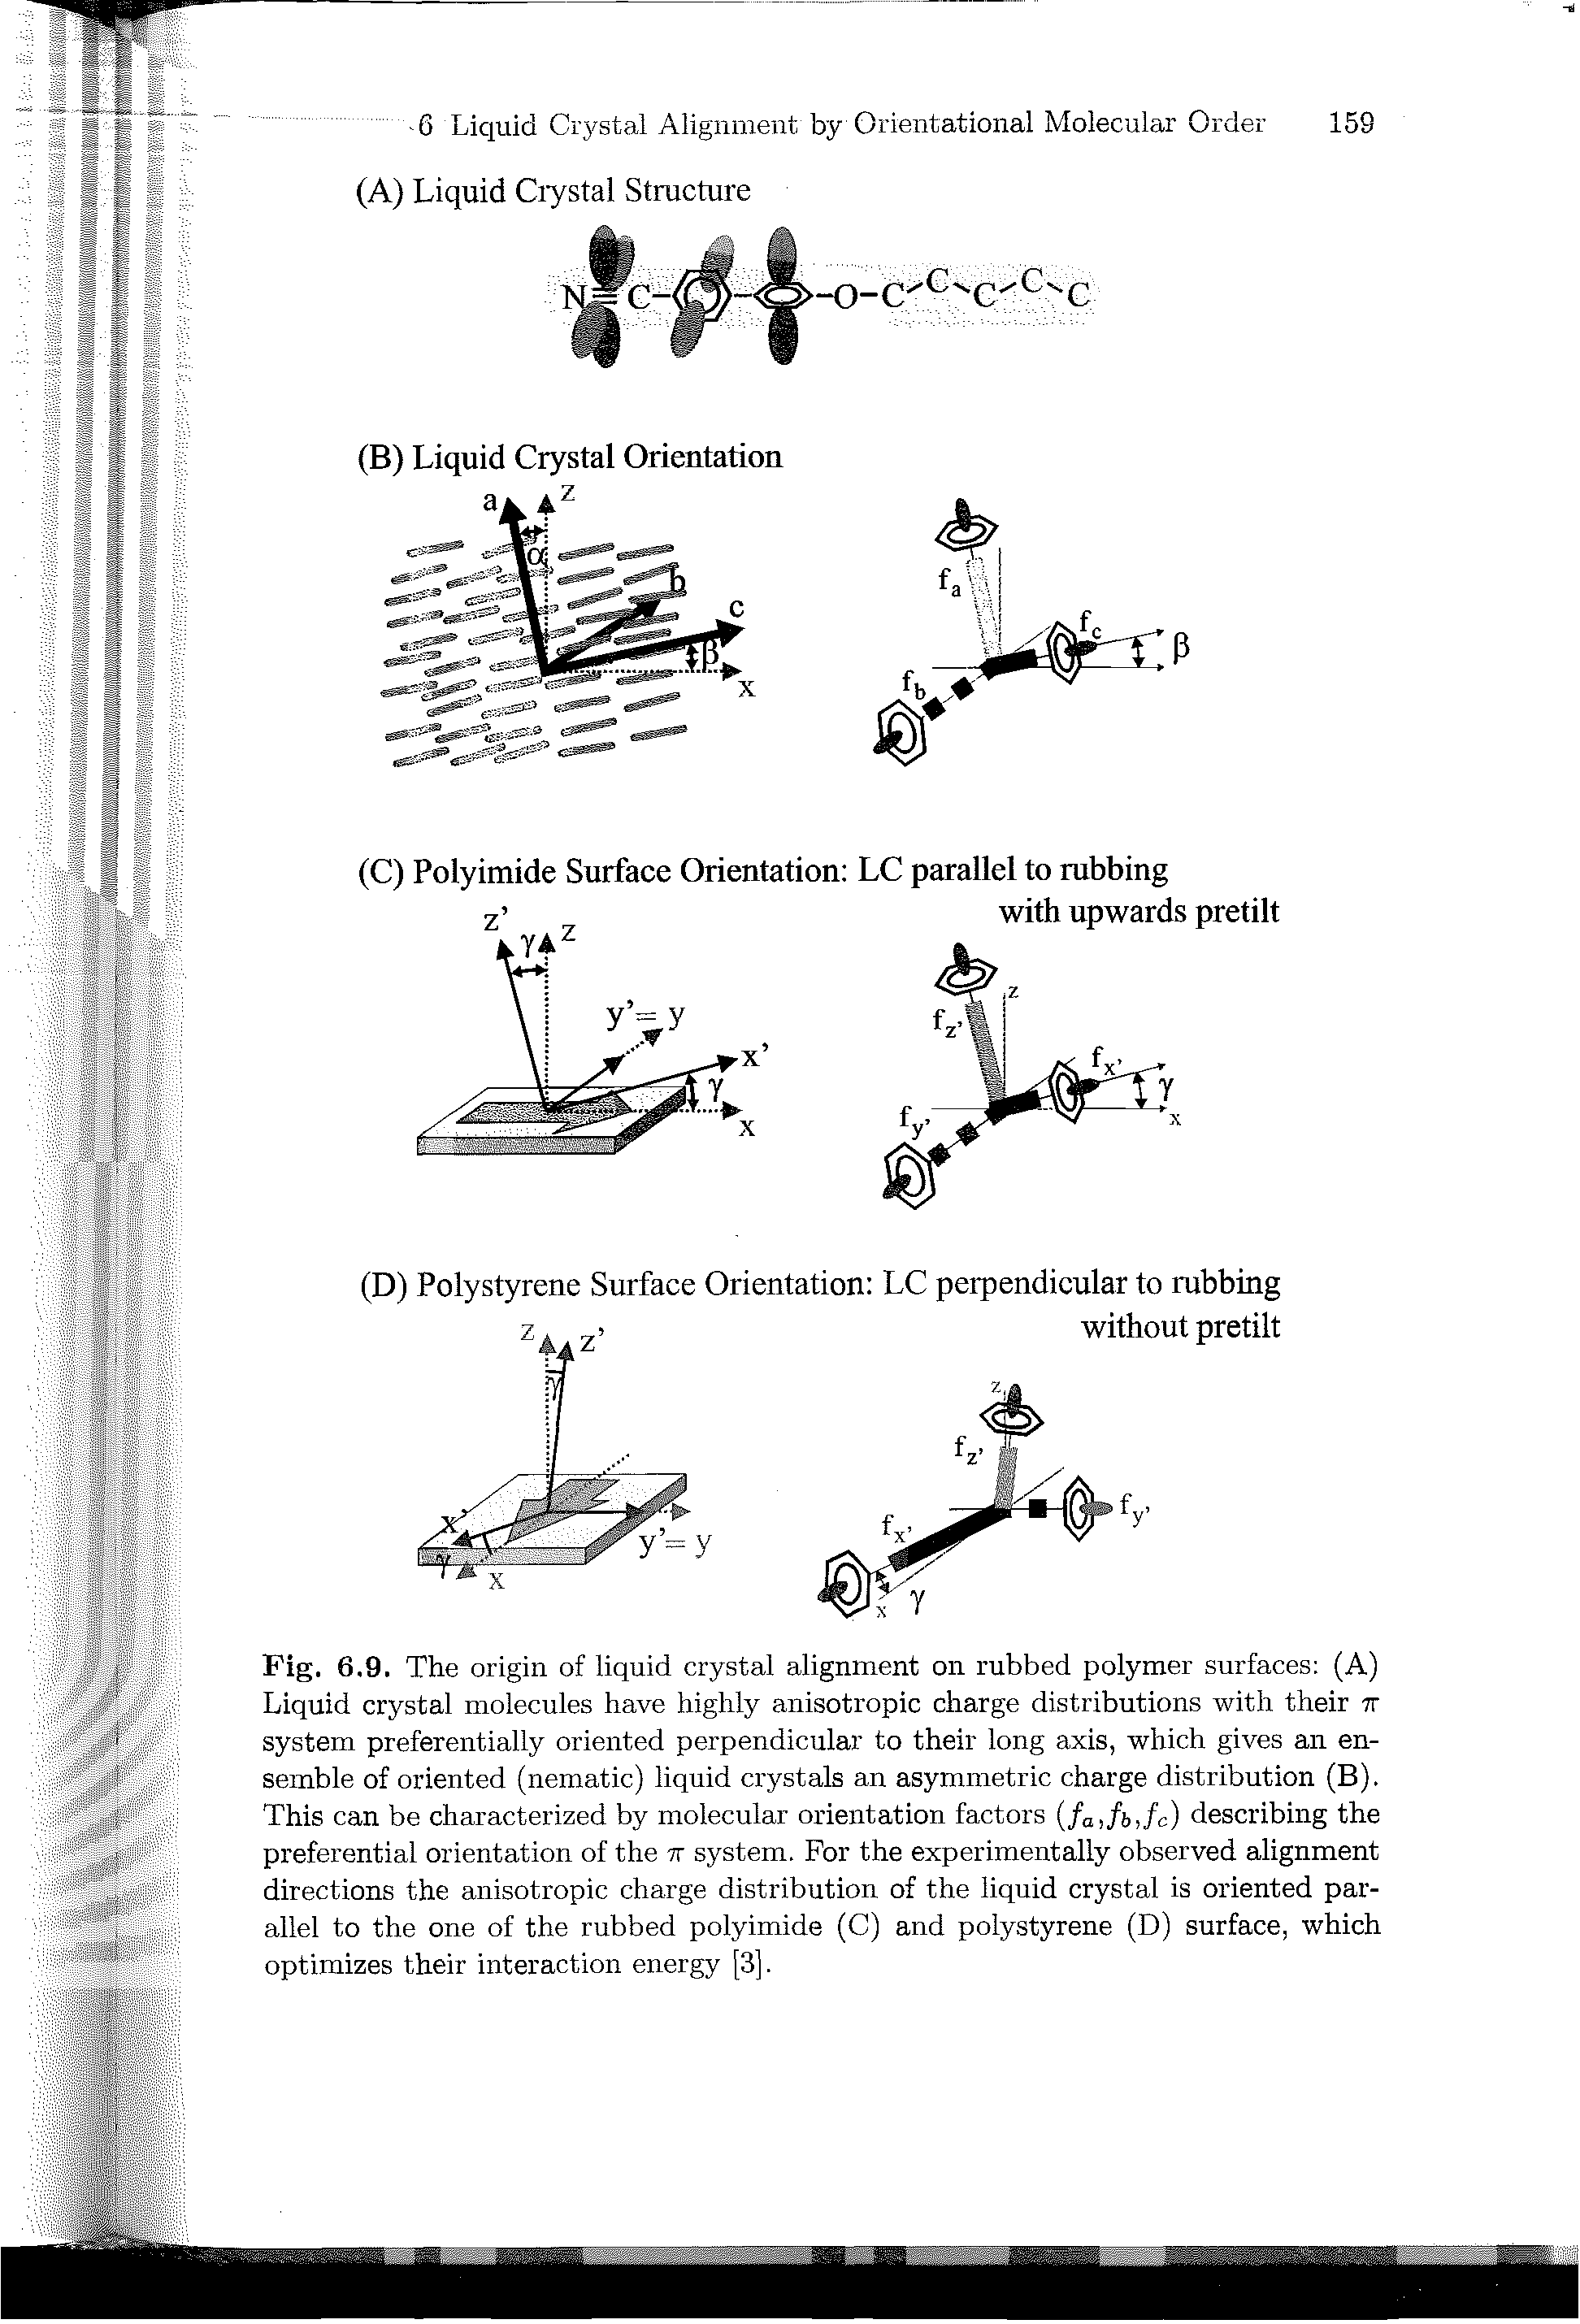 Fig. 6.9. The origin of liquid crystal alignment on rubbed polymer surfaces (A) Liquid crystal molecules have highly anisotropic charge distributions with their tt system preferentially oriented perpendicular to their long axis, which gives an ensemble of oriented (nematic) liquid crystals an asymmetric charge distribution (B). This can be characterized by molecular orientation factors (fa,fb,fc) describing the preferential orientation of the tt system. For the experimentally observed alignment directions the anisotropic charge distribution of the liquid crystal is oriented parallel to the one of the rubbed polyimide (C) and polystyrene (D) surface, which optimizes their interaction energy [3].